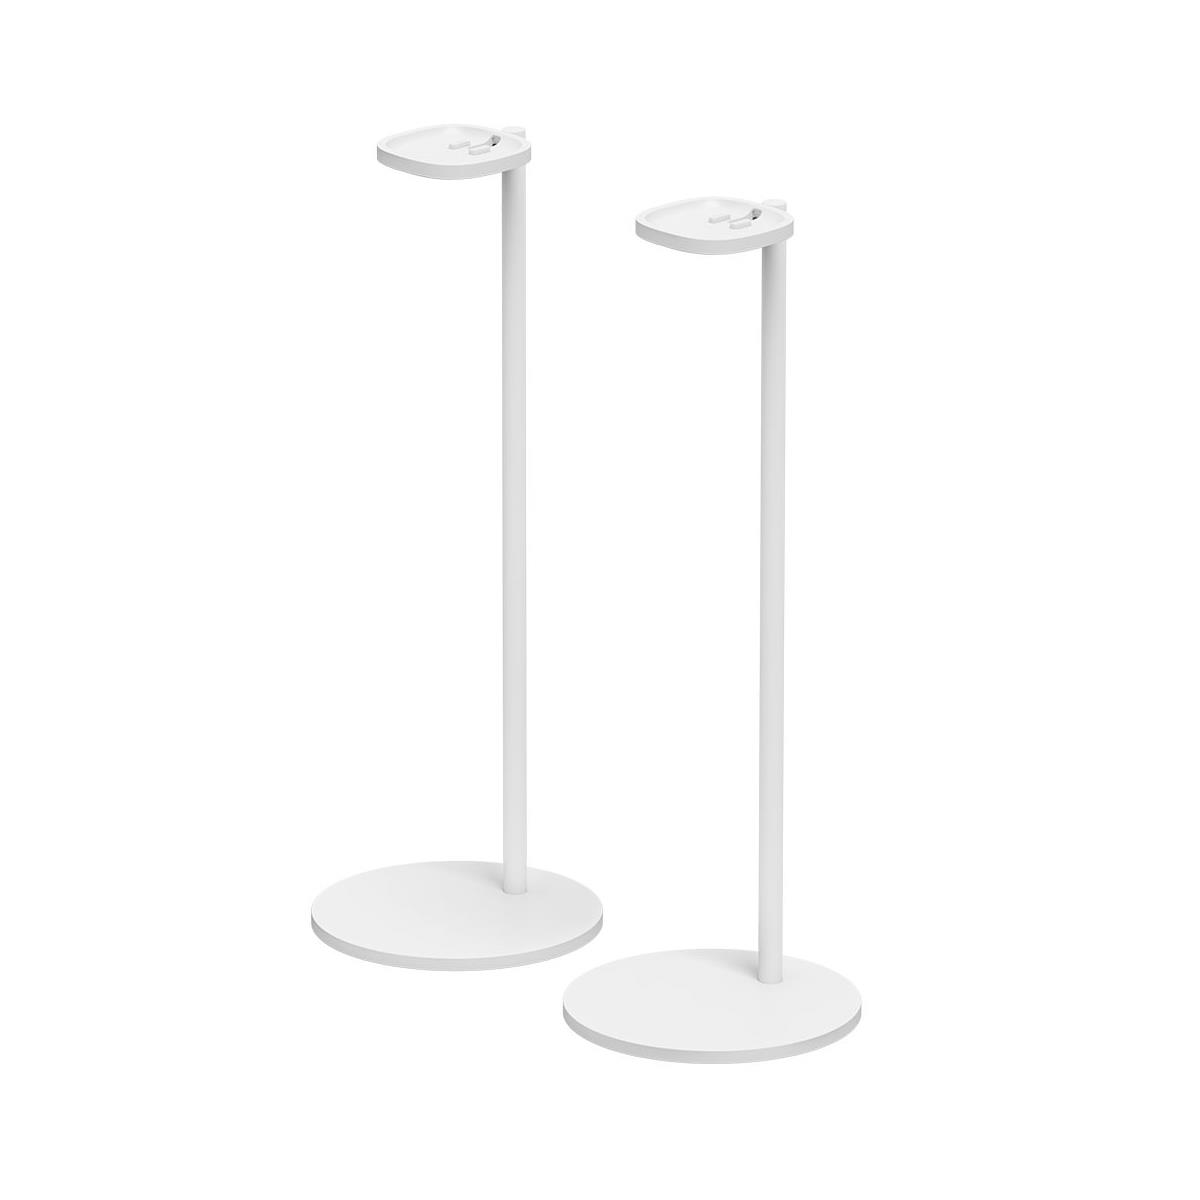 Image of Sonos Stand for One and Play:1